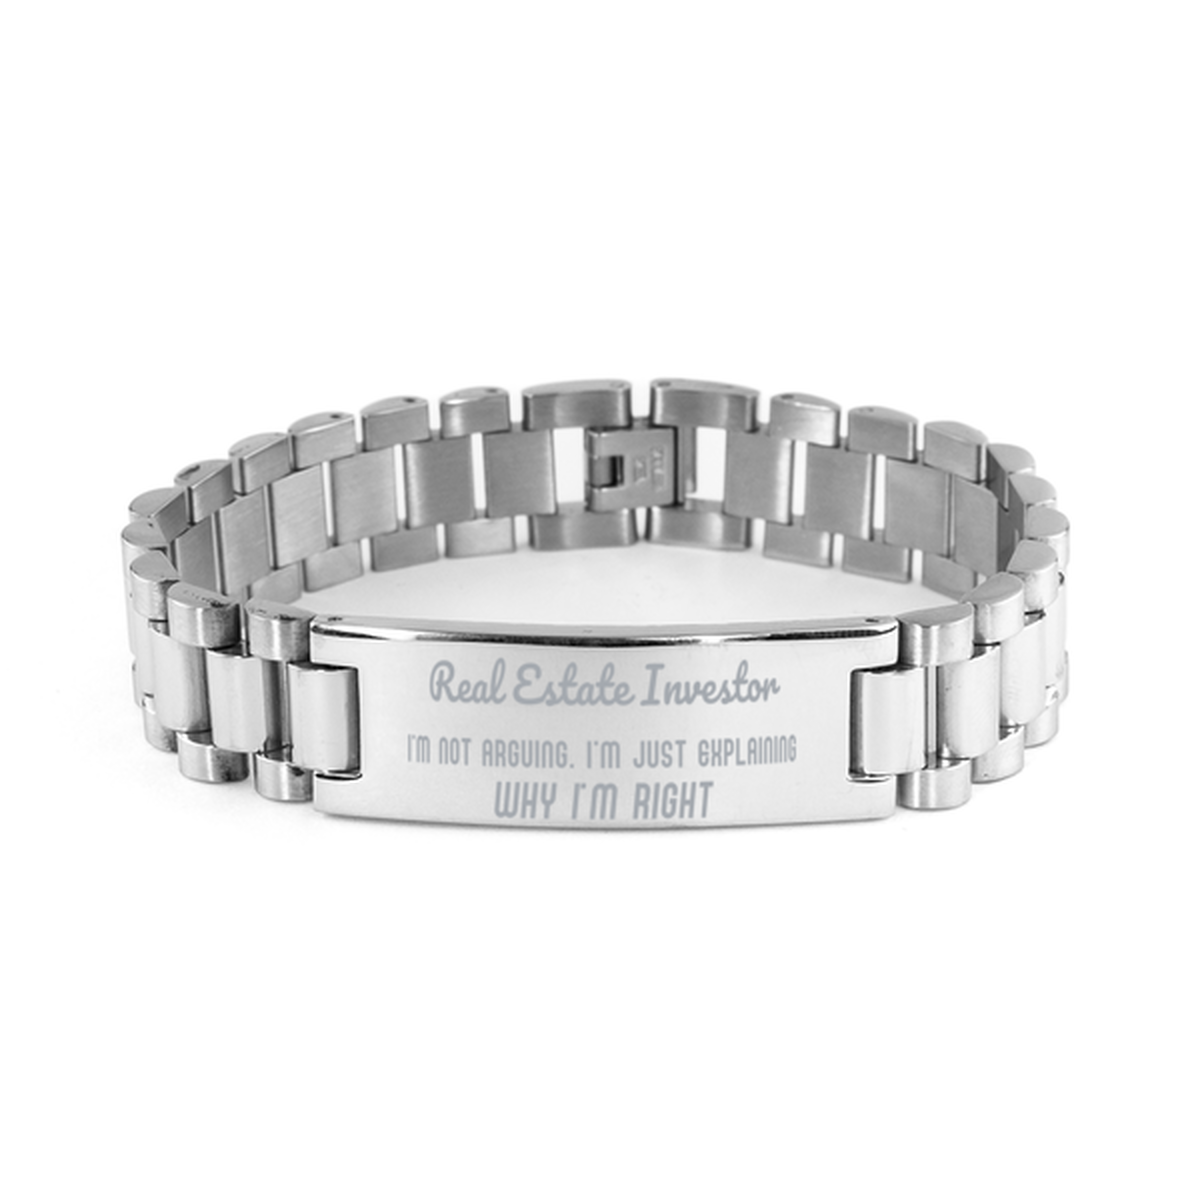 Real Estate Investor I'm not Arguing. I'm Just Explaining Why I'm RIGHT Ladder Stainless Steel Bracelet, Graduation Birthday Christmas Real Estate Investor Gifts For Real Estate Investor Funny Saying Quote Present for Men Women Coworker